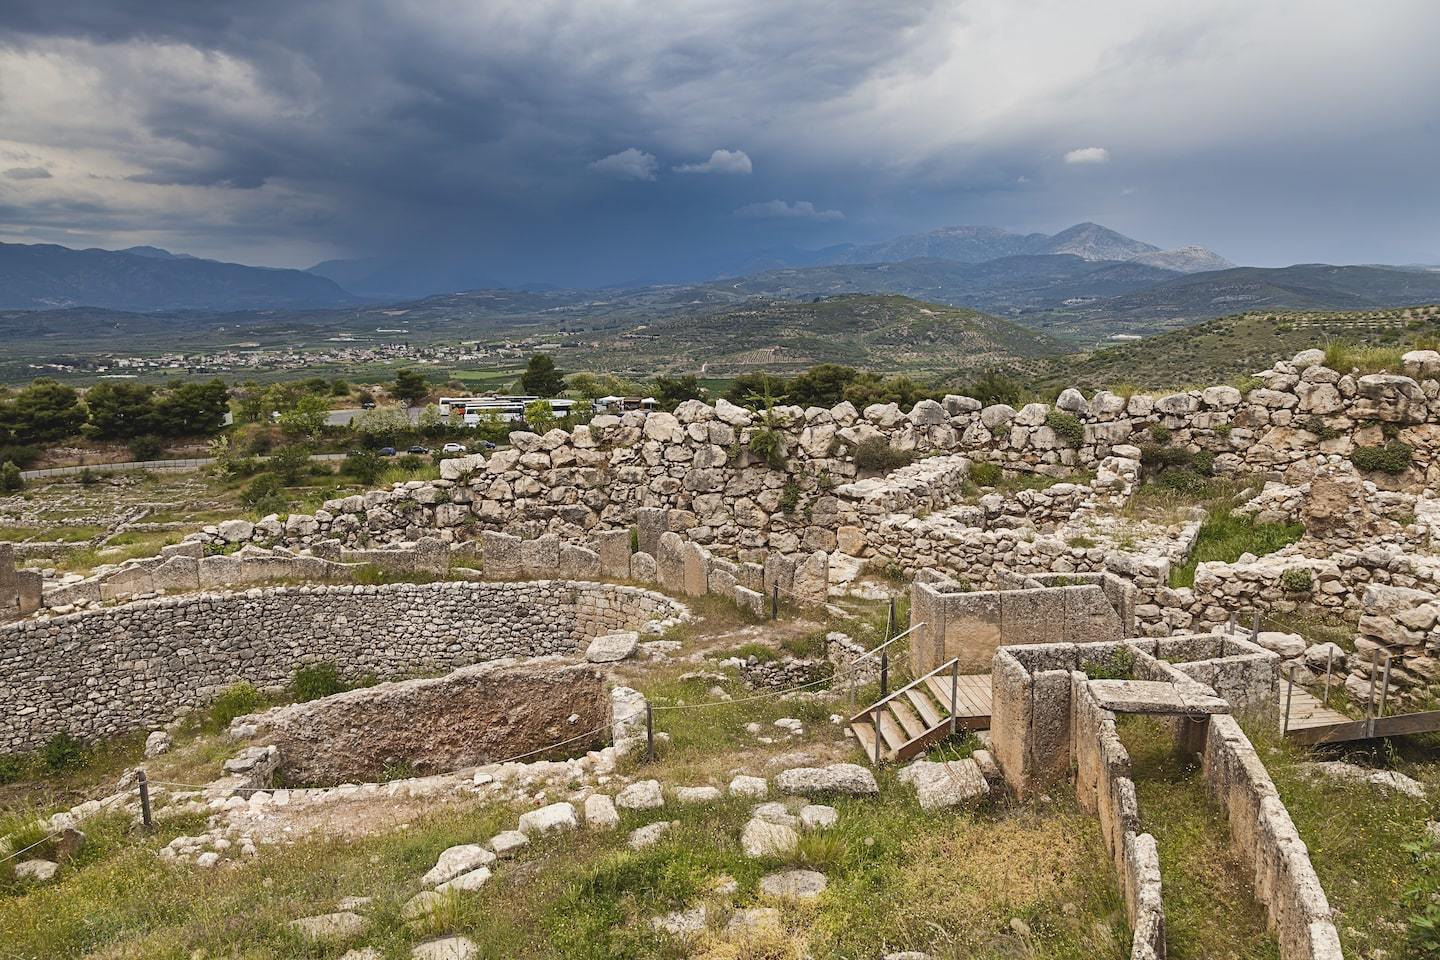 Remains of an ancient city in Mycenae, Greece